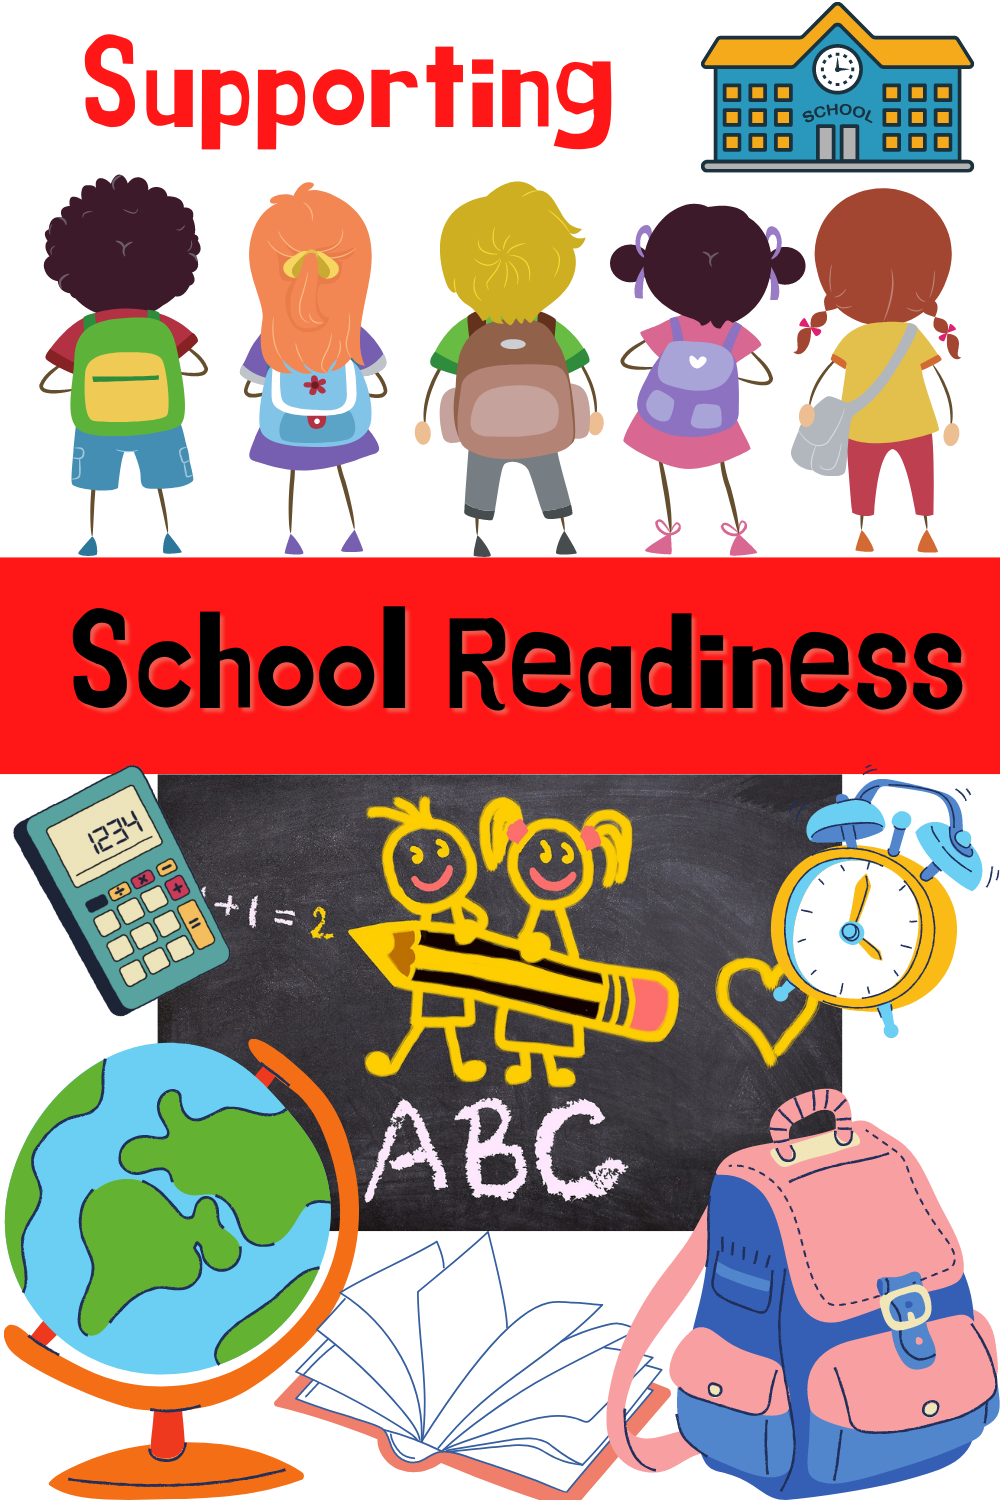 Supporting School Readiness